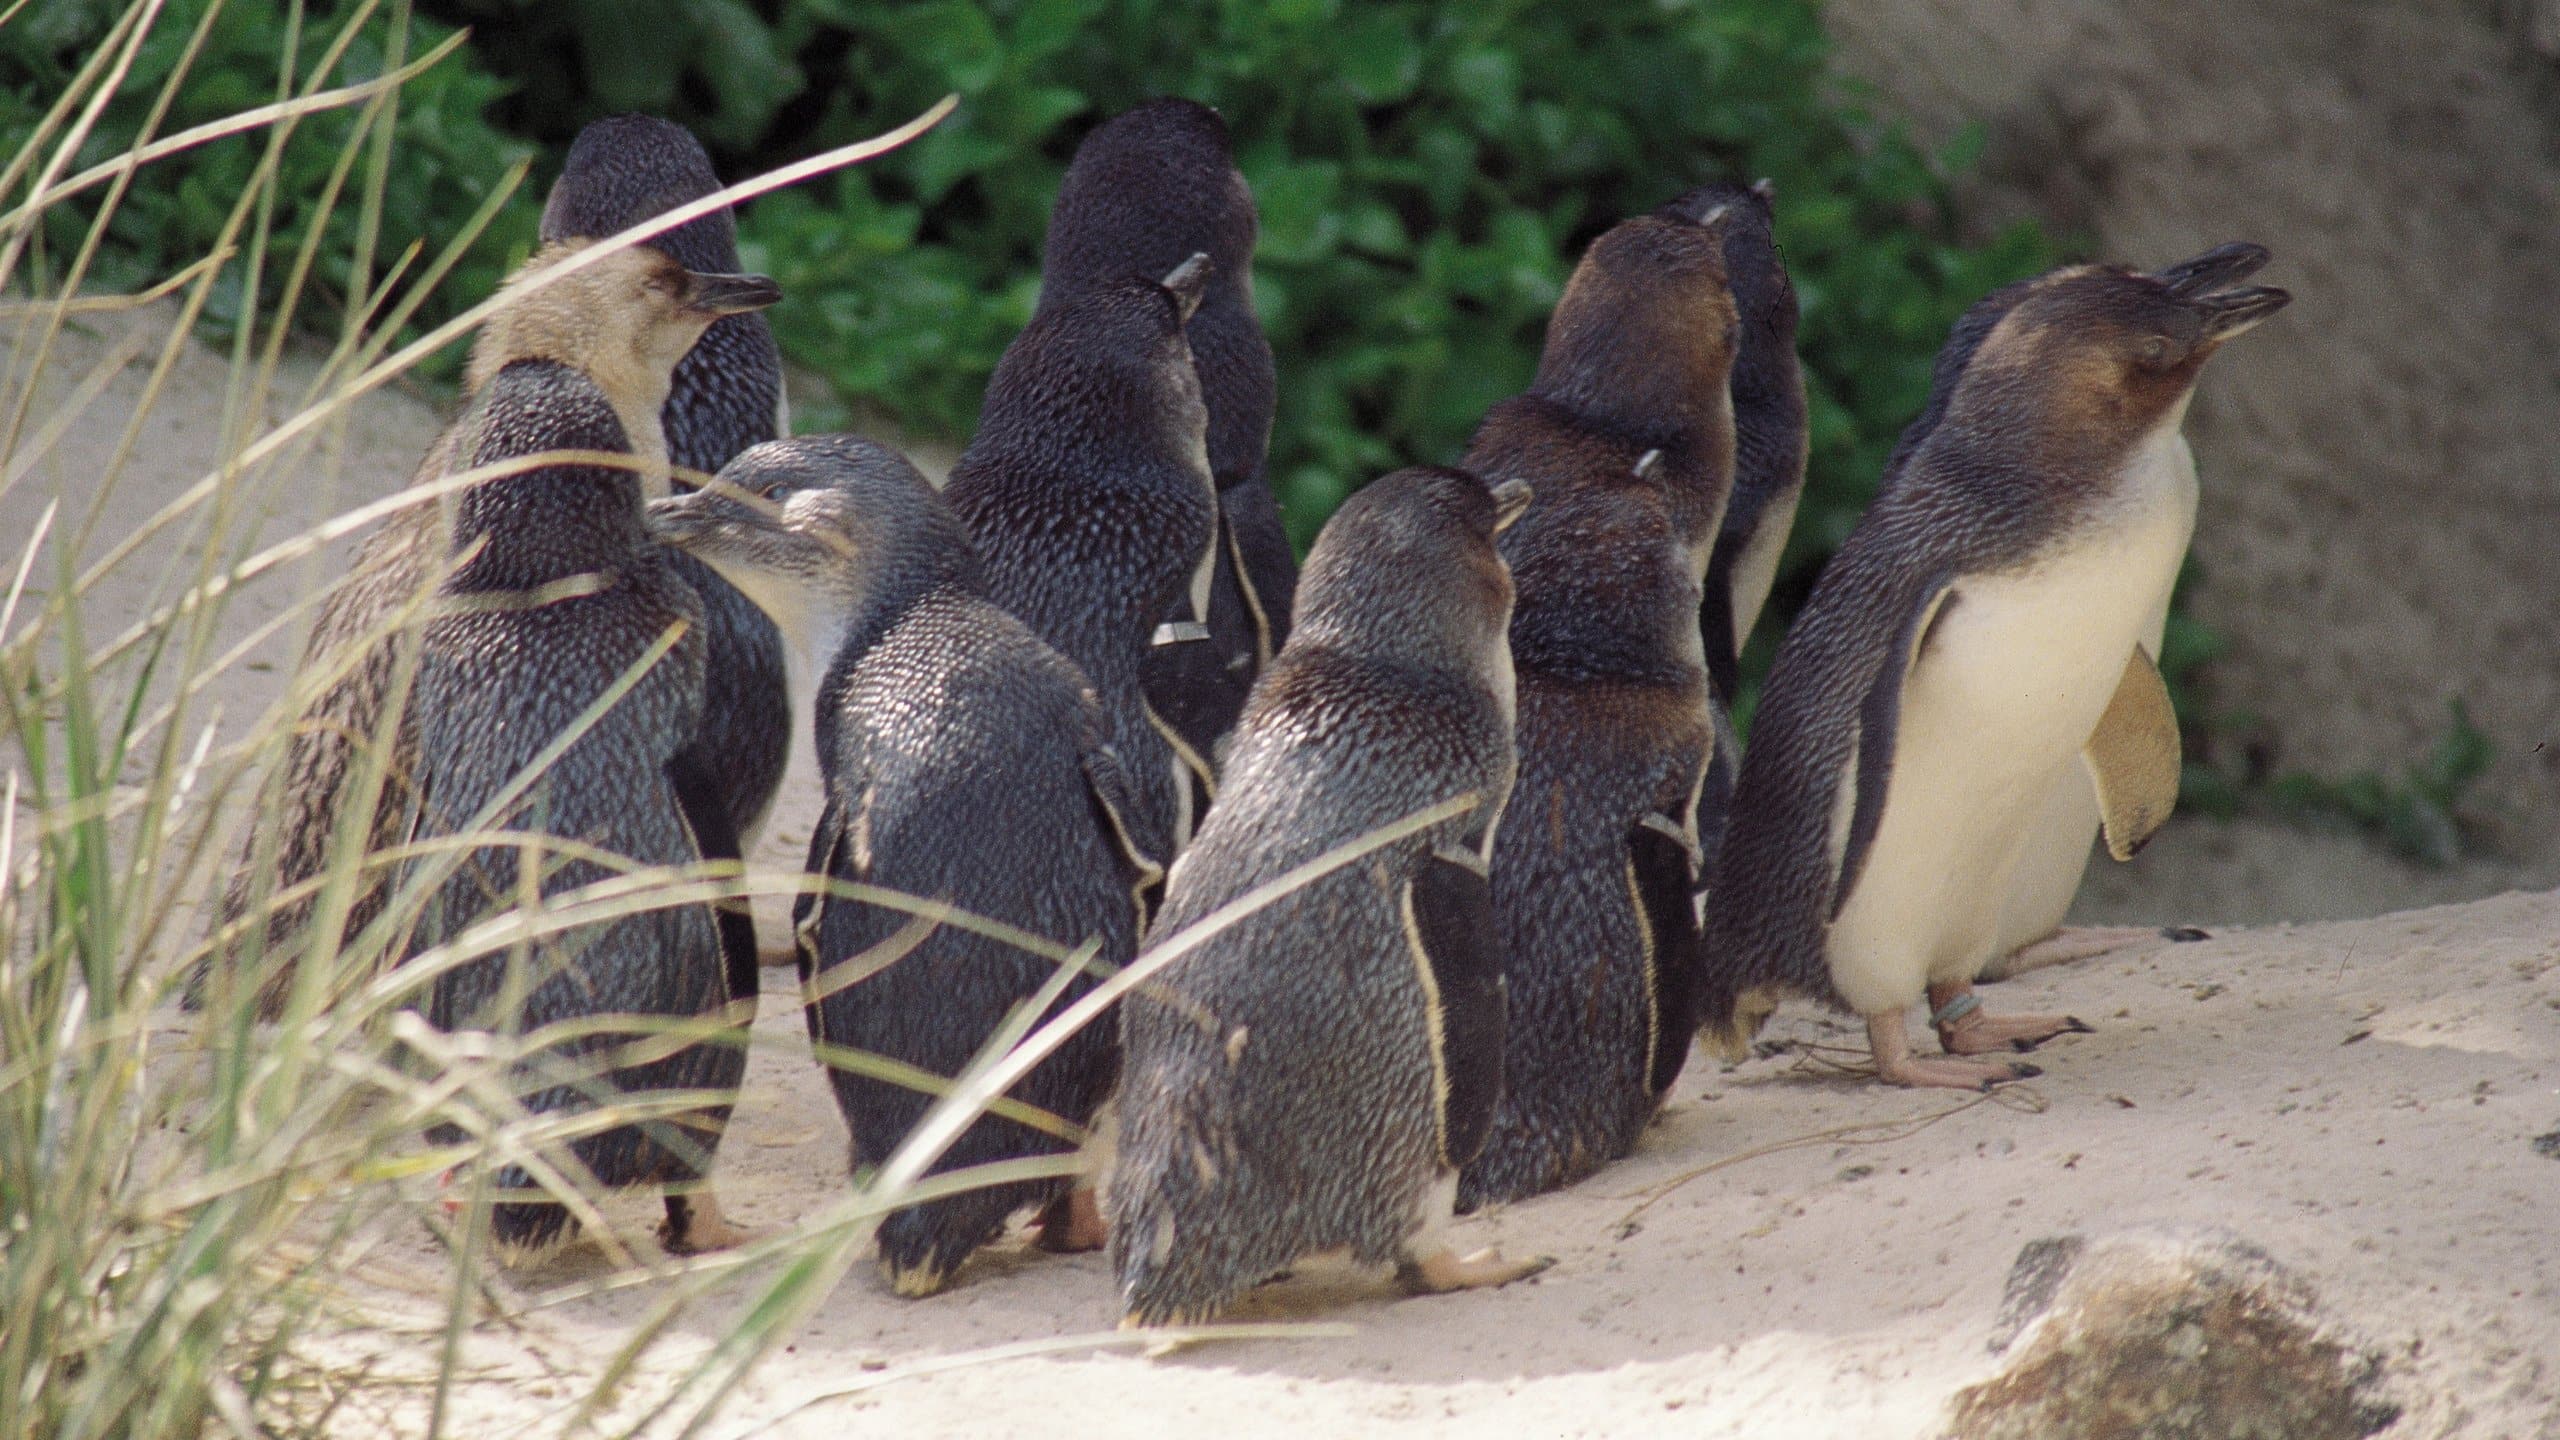 Penguins at Adelaide Zoo